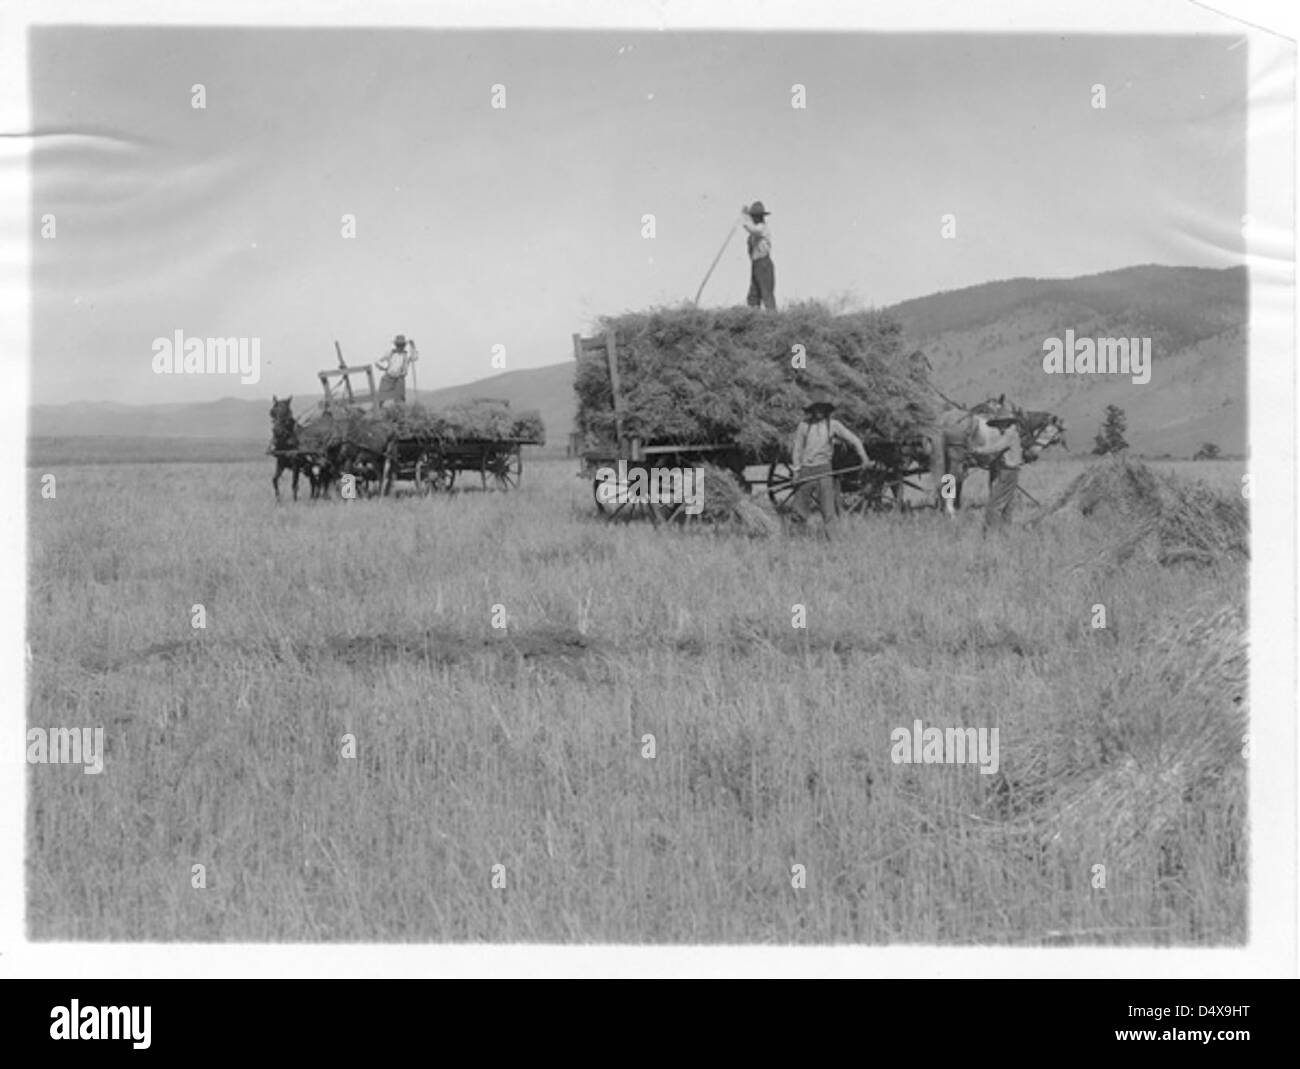 Two Wagons, Indians Gathering Grain Stock Photo